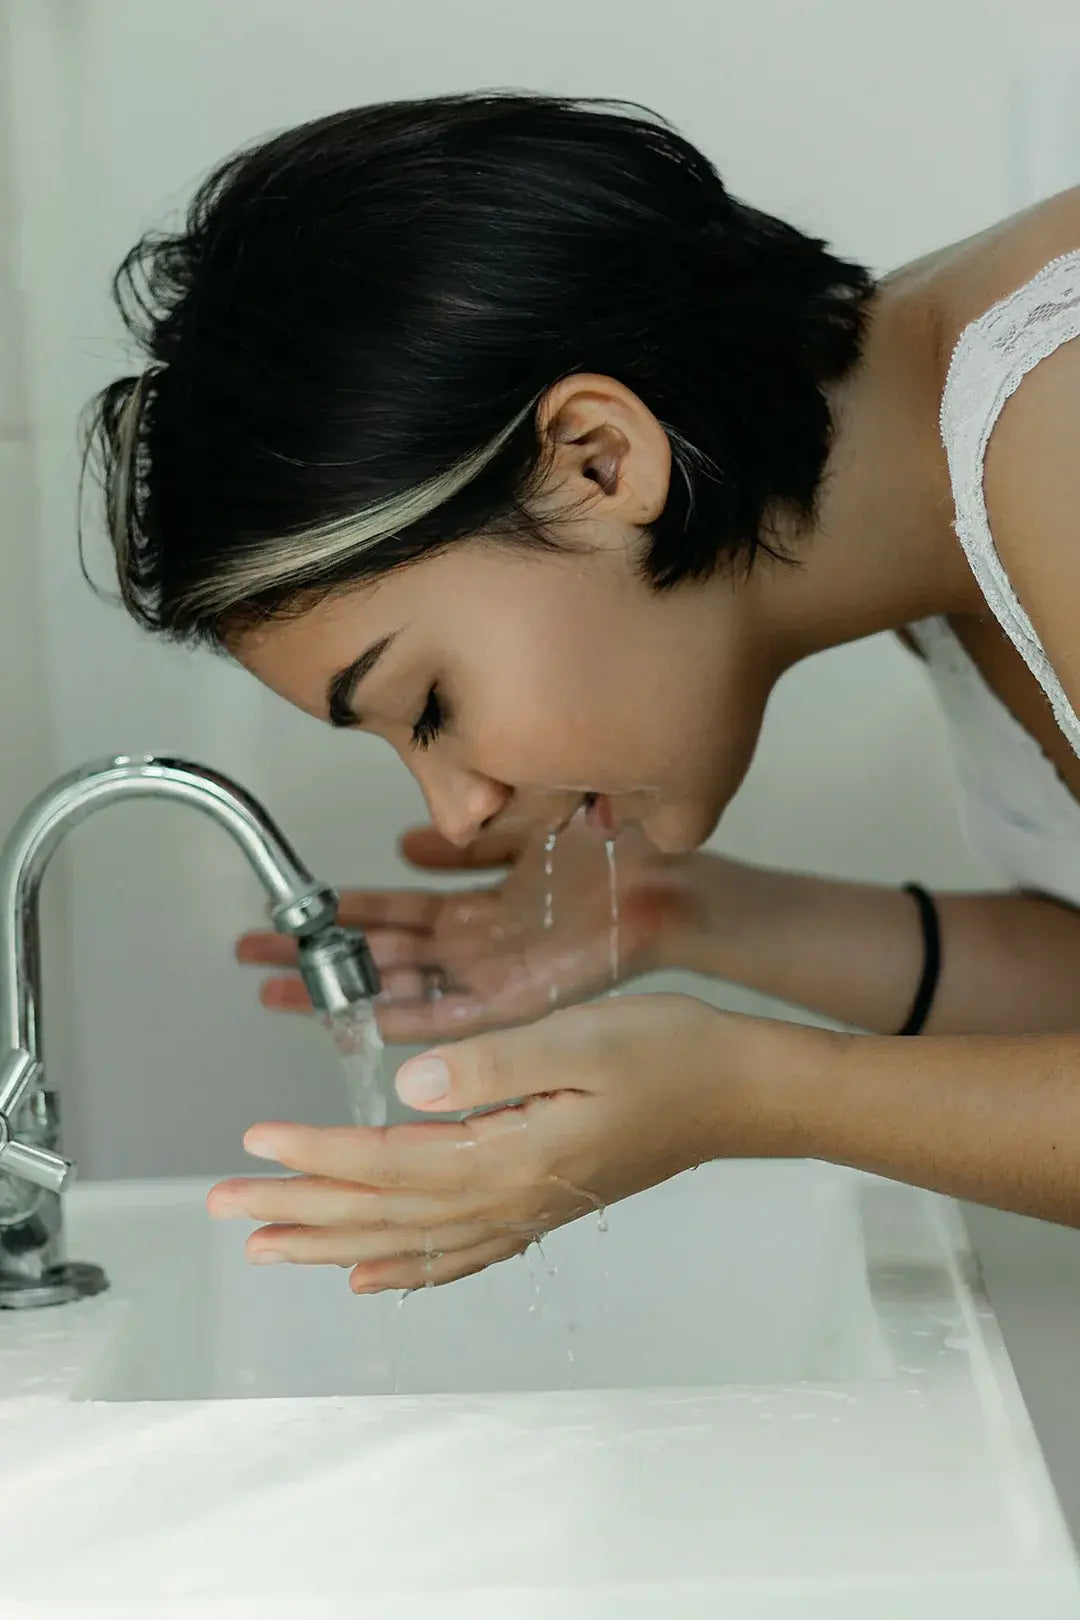 Woman cleaning her face with water